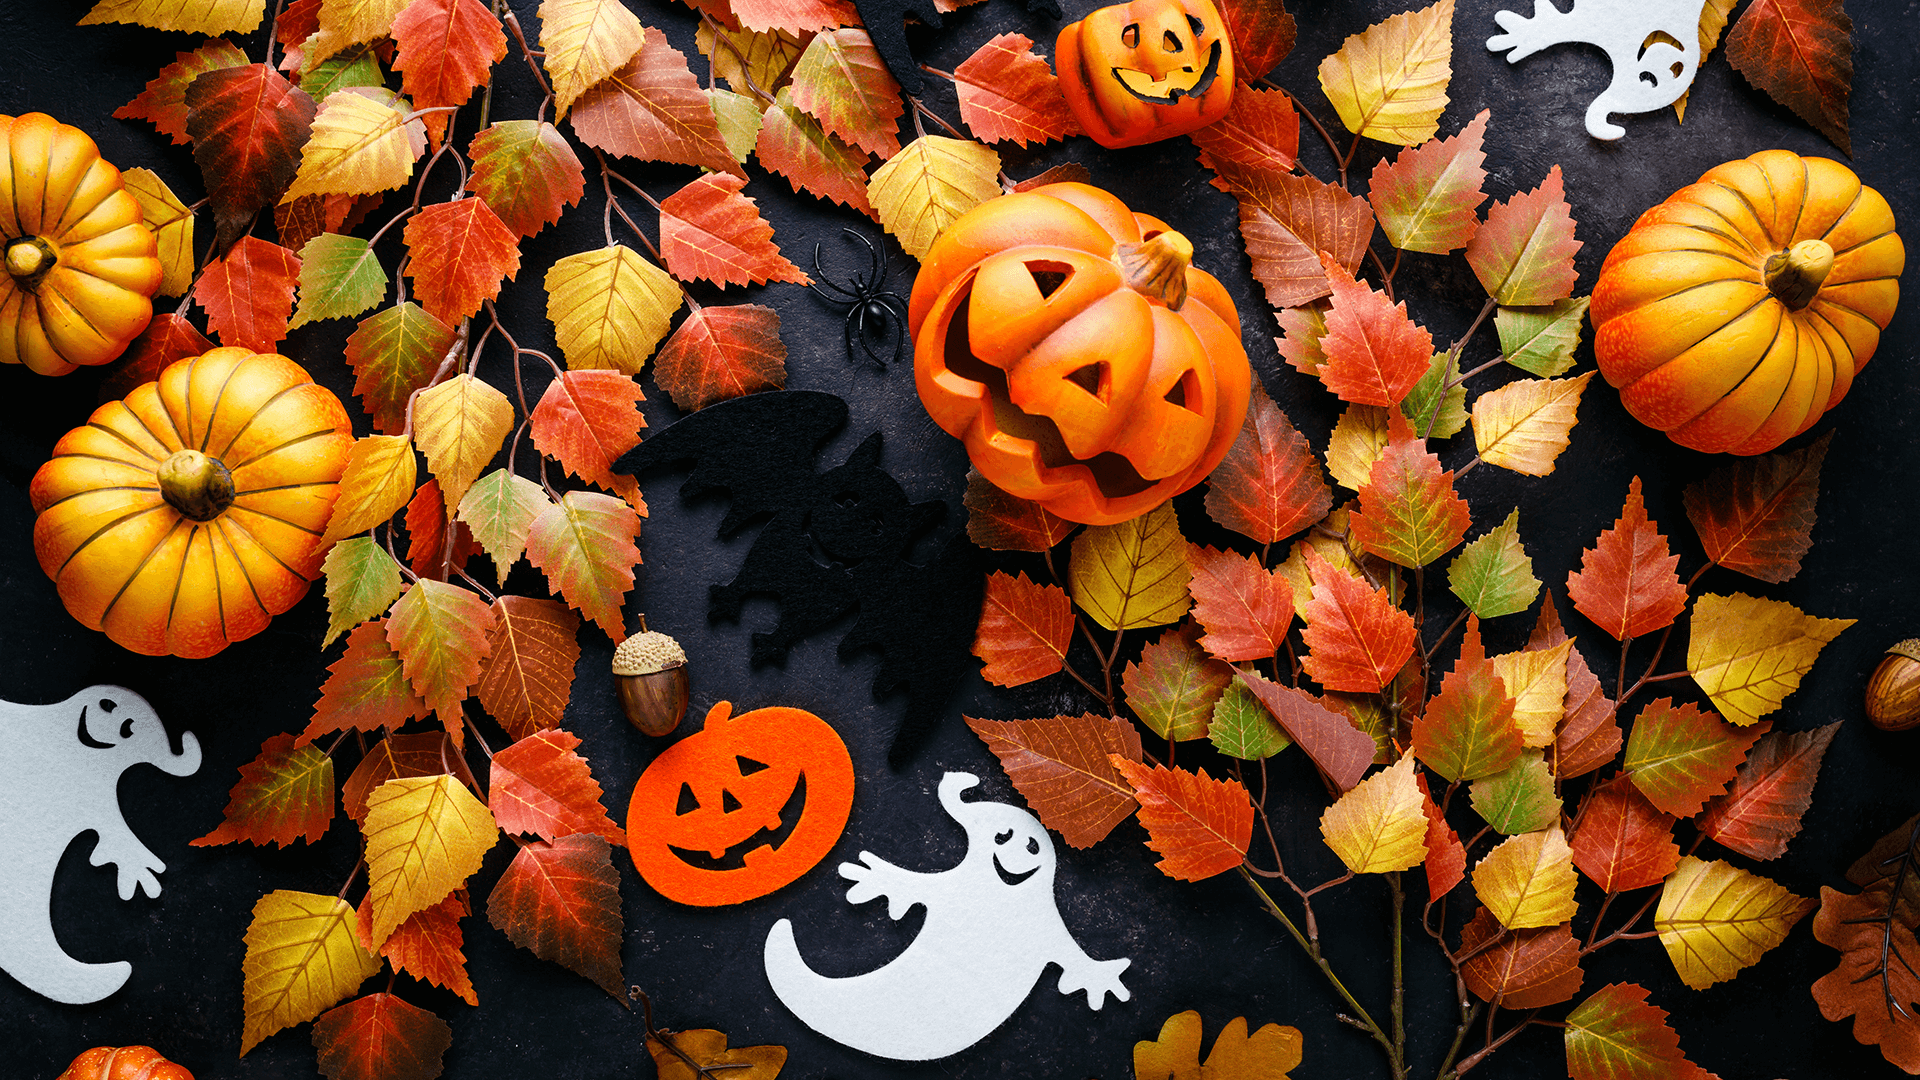 Halloween pumpkins, ghosts and fall leaves background